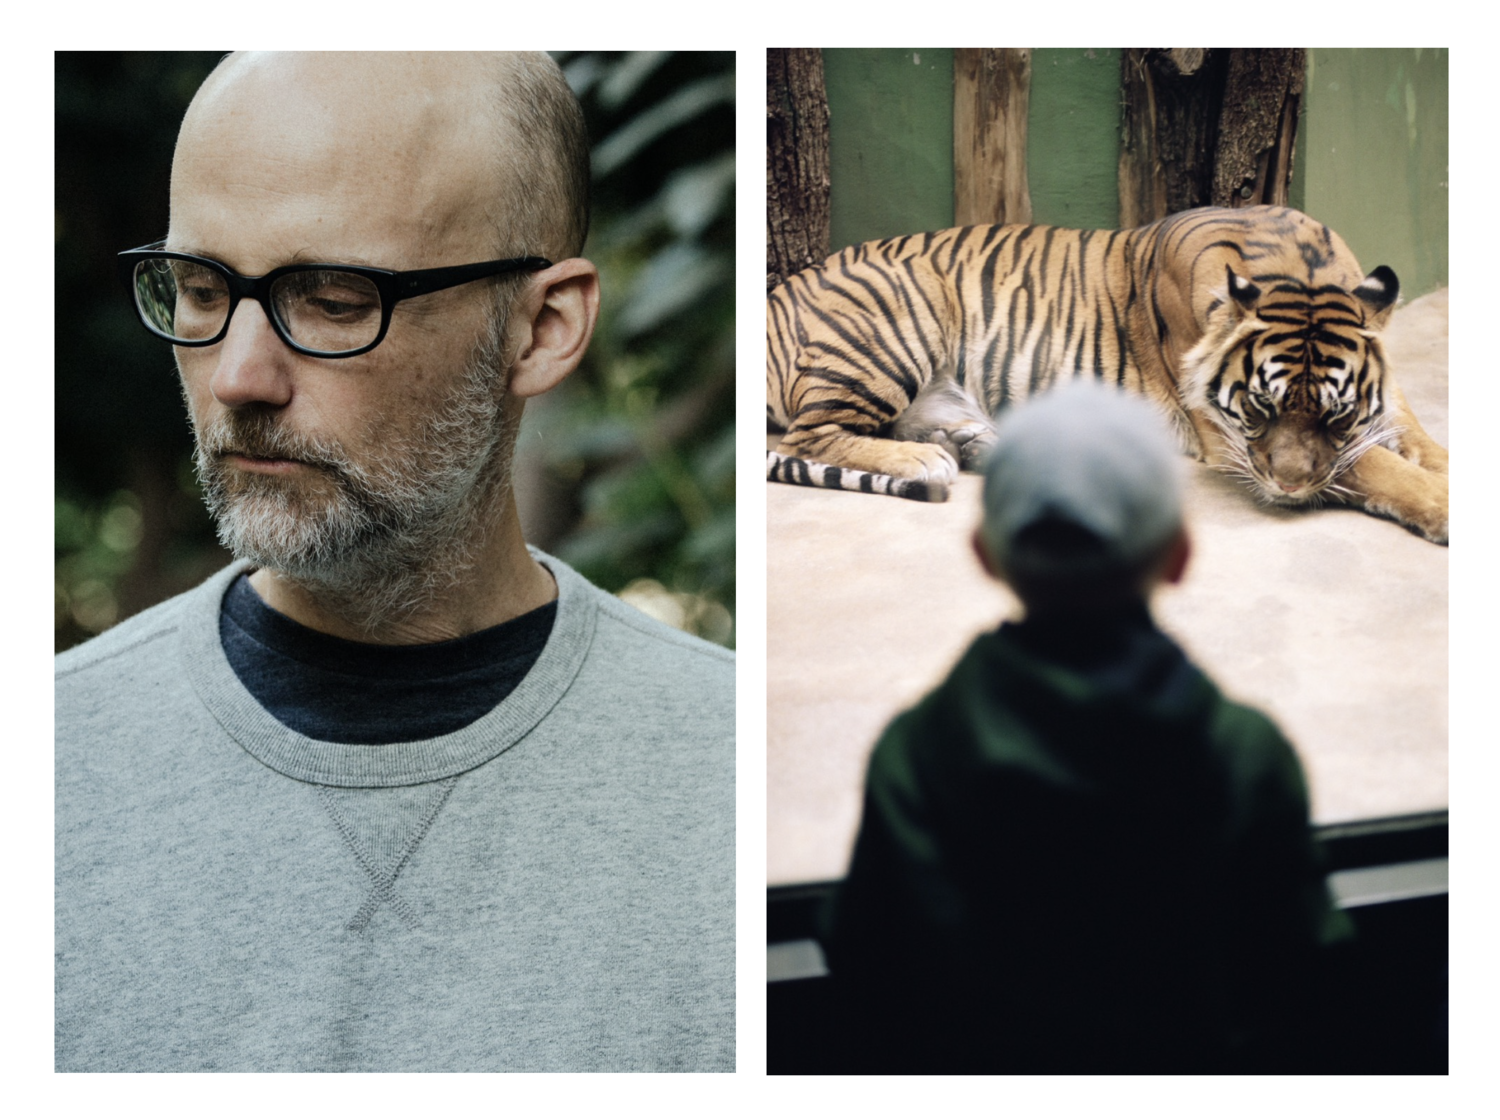 THE LOST EXPLORER - MOBY